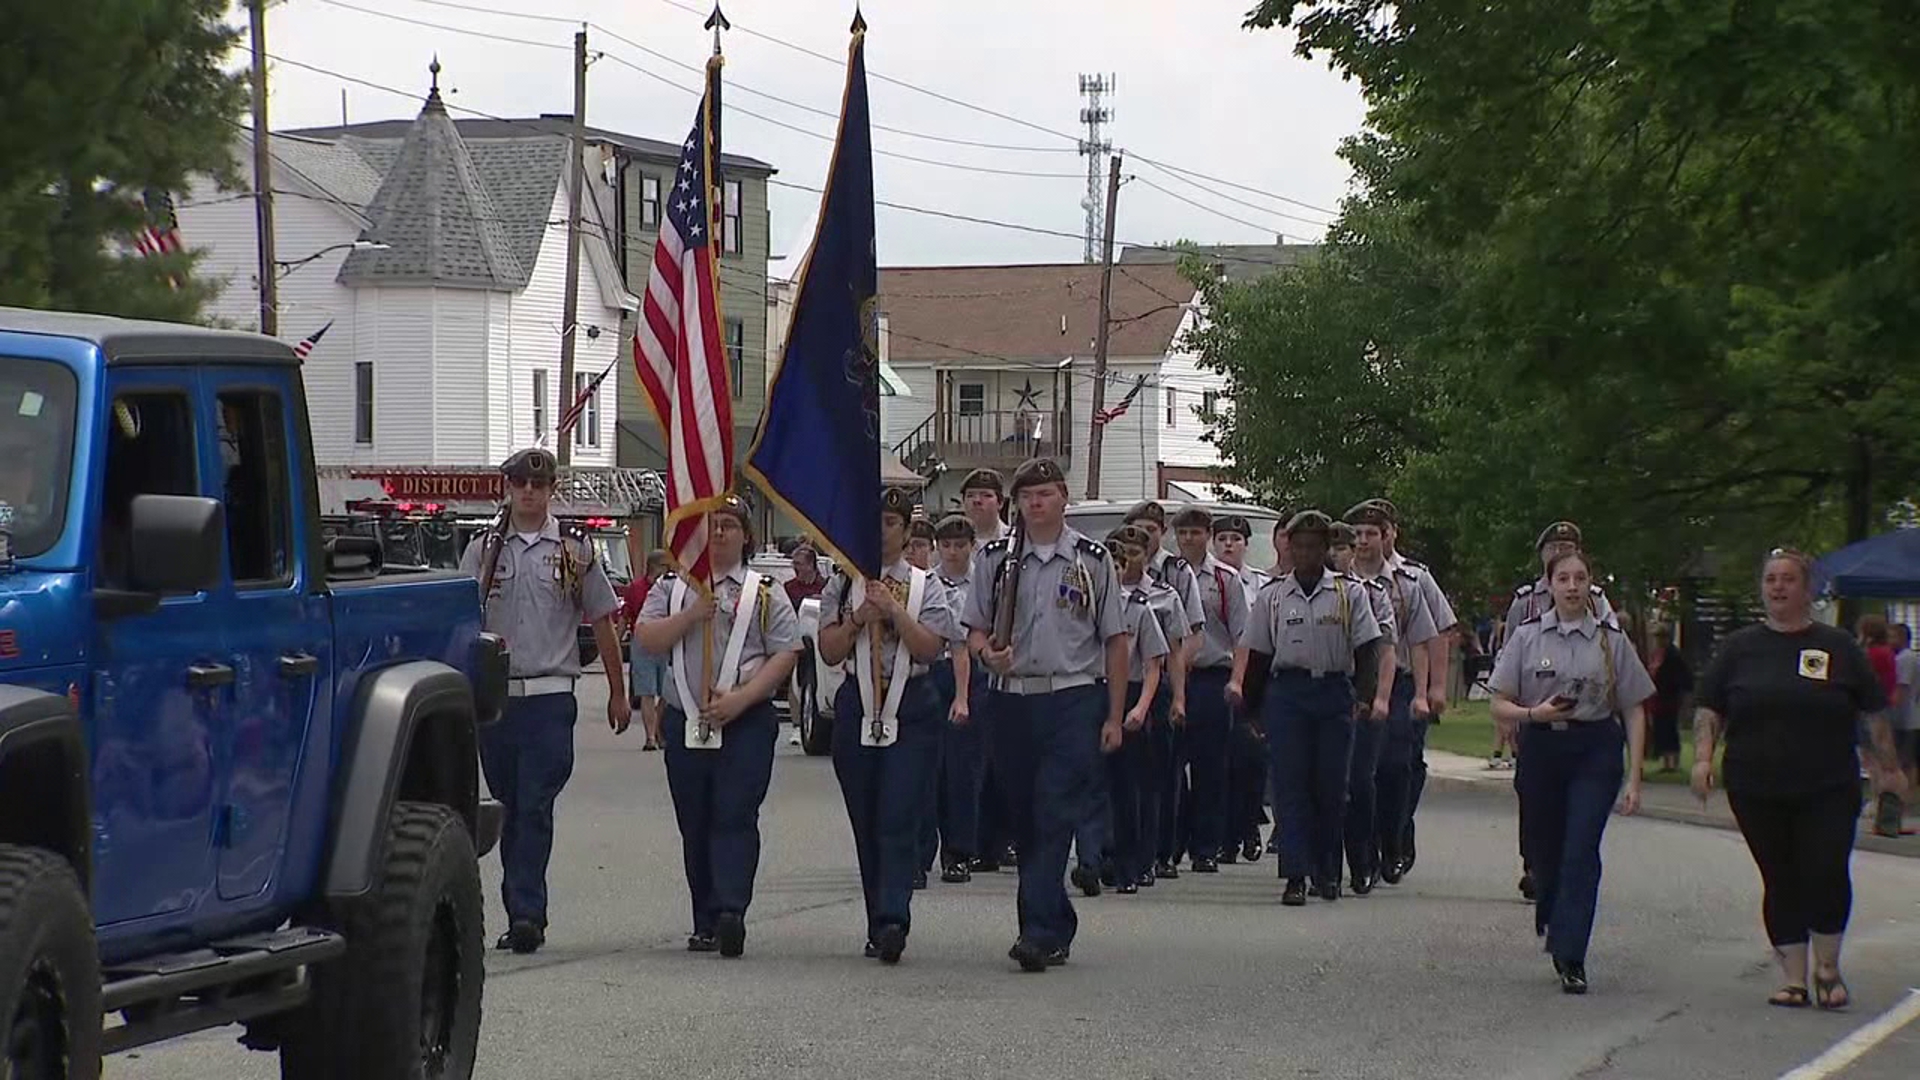 It's a tribute to the fallen in Summit Hill that dates back at least a century. Newswatch 16's Emily Kress shows us the salute to those who died for our country.